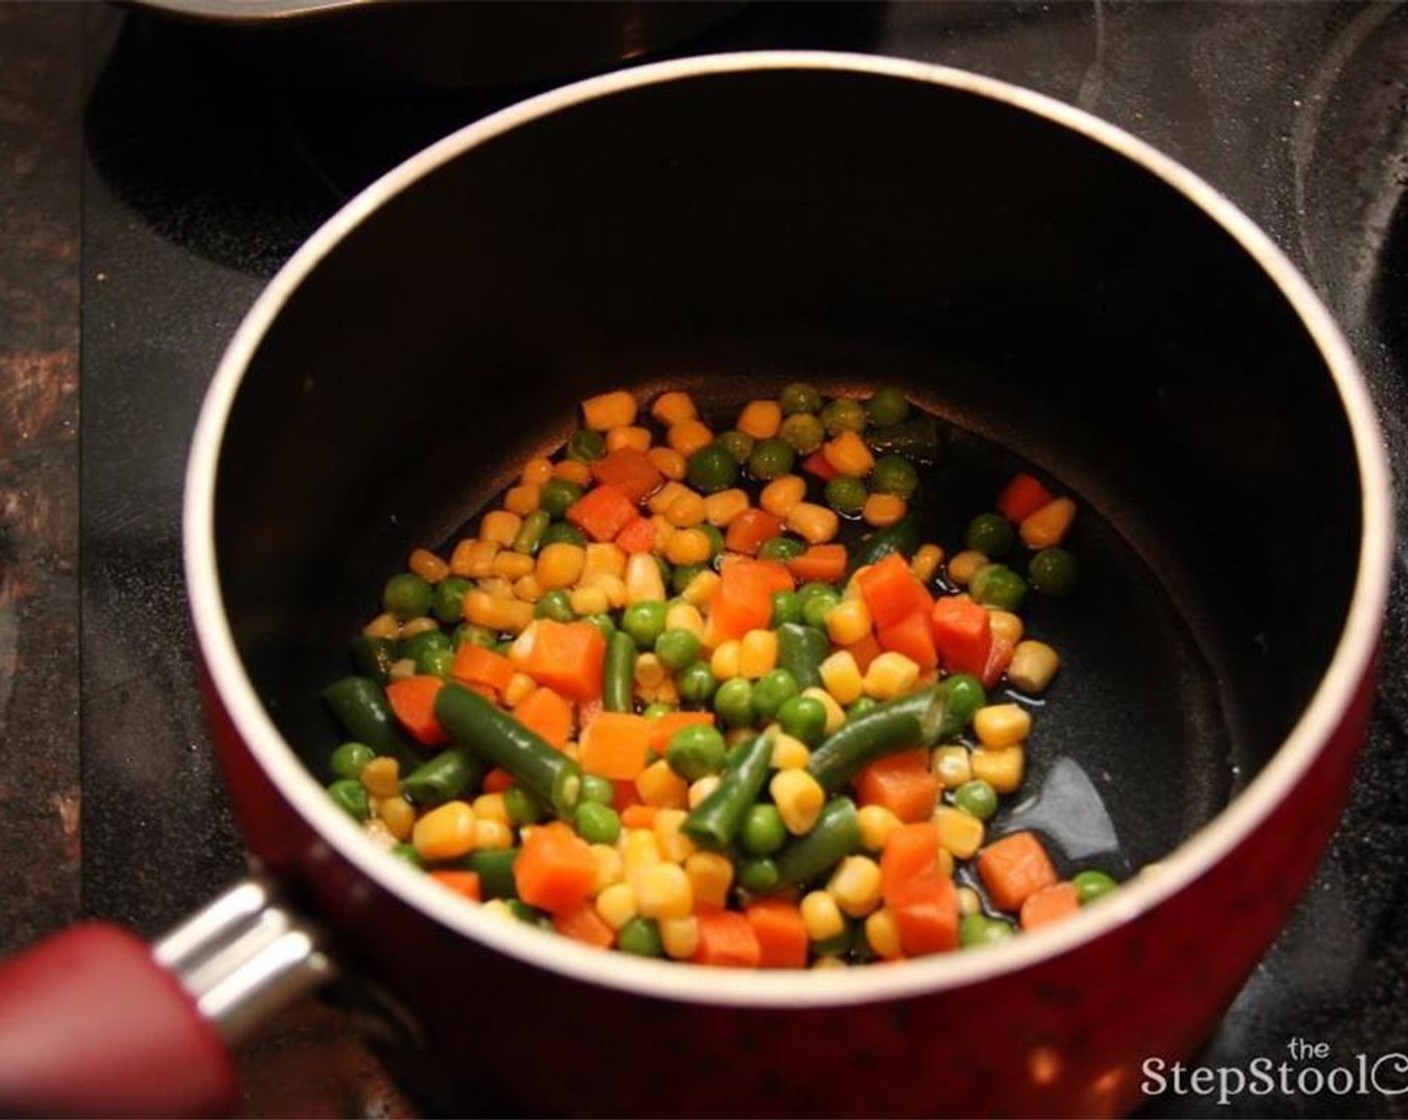 step 3 Cook the Frozen Mixed Vegetables (1 cup) according to package's instructions.